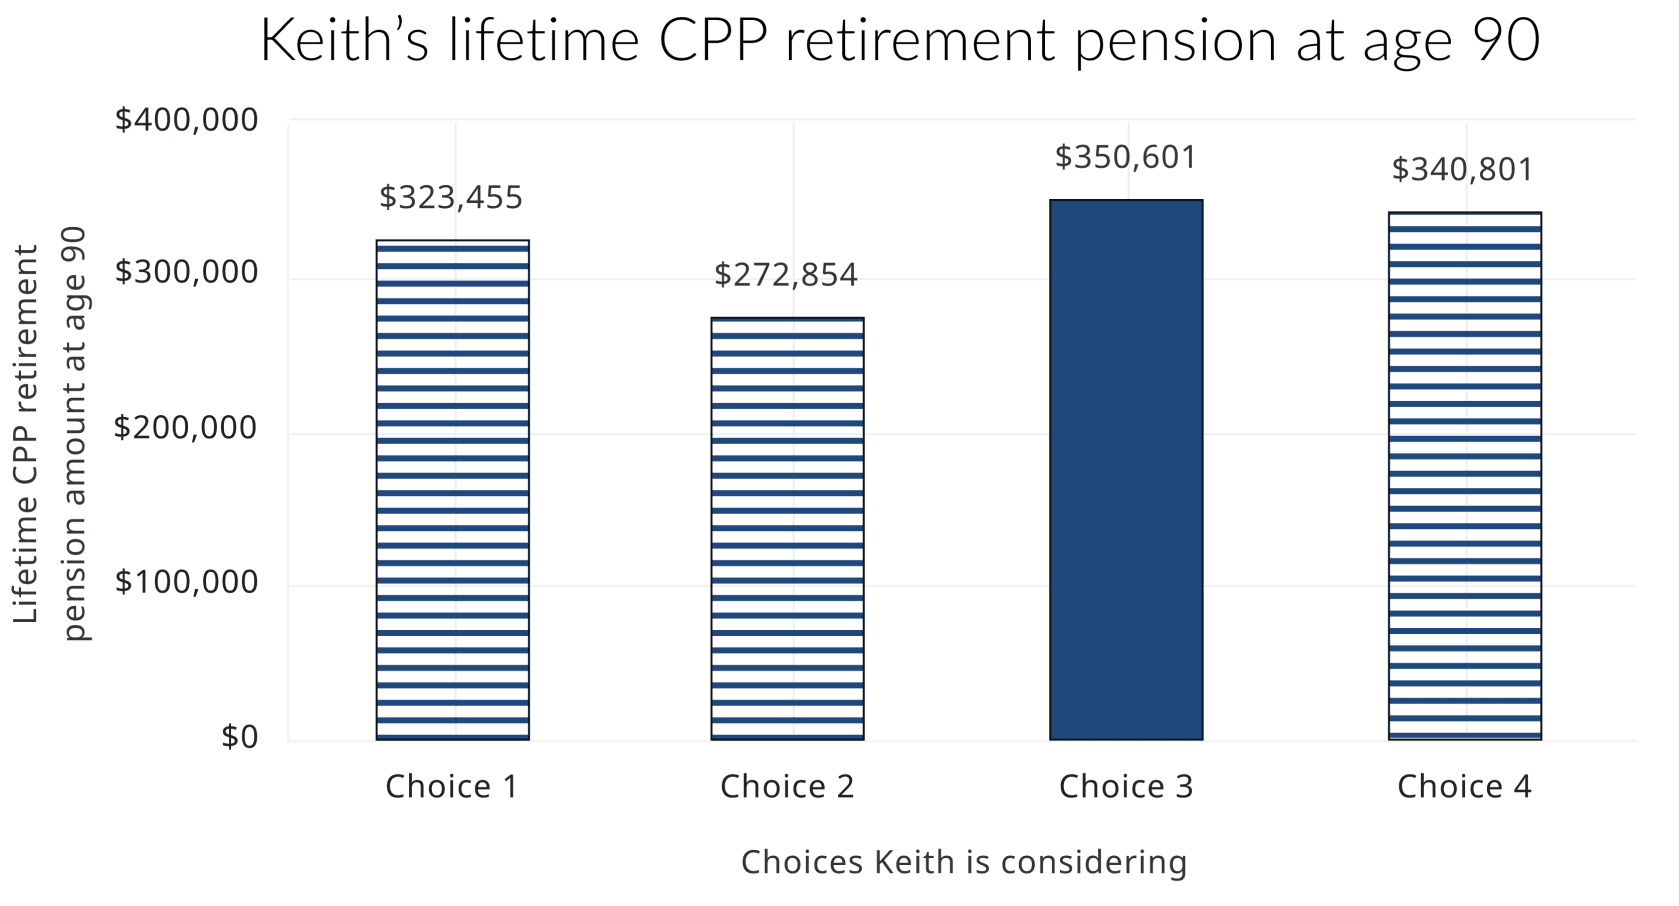 This chart shows the lifetime CPP retirement pension amount for 4 choices Keith is thinking about. It shows that if Keith lives to age 90, starting his CPP retirement pension at age 65 while working and contributing until 70 would give him the most retirement income.